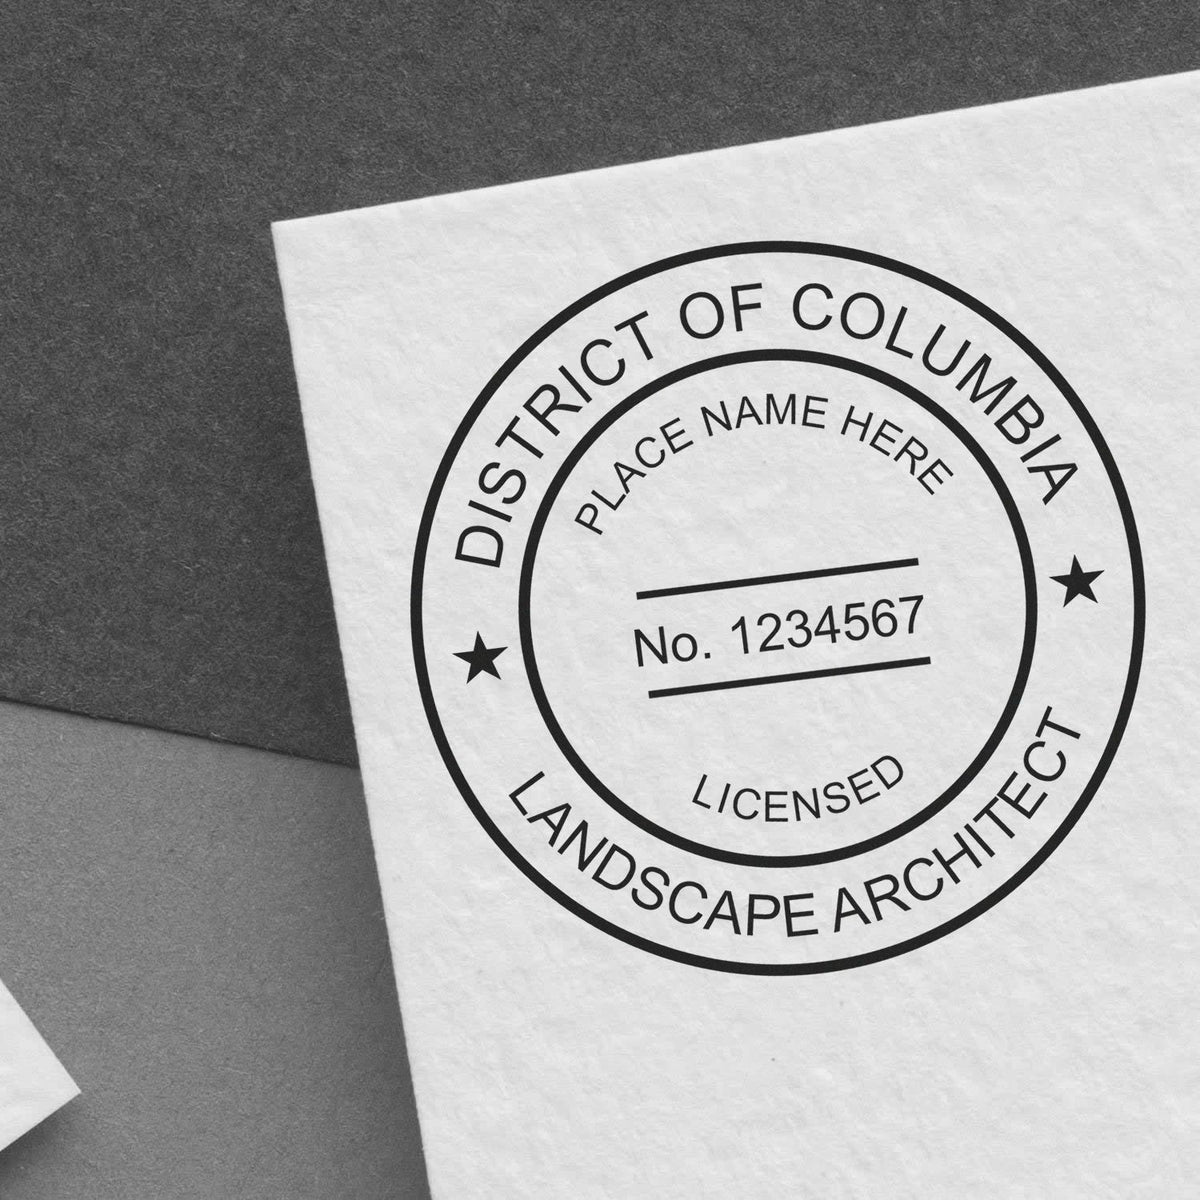 A lifestyle photo showing a stamped image of the District of Columbia Landscape Architectural Seal Stamp on a piece of paper